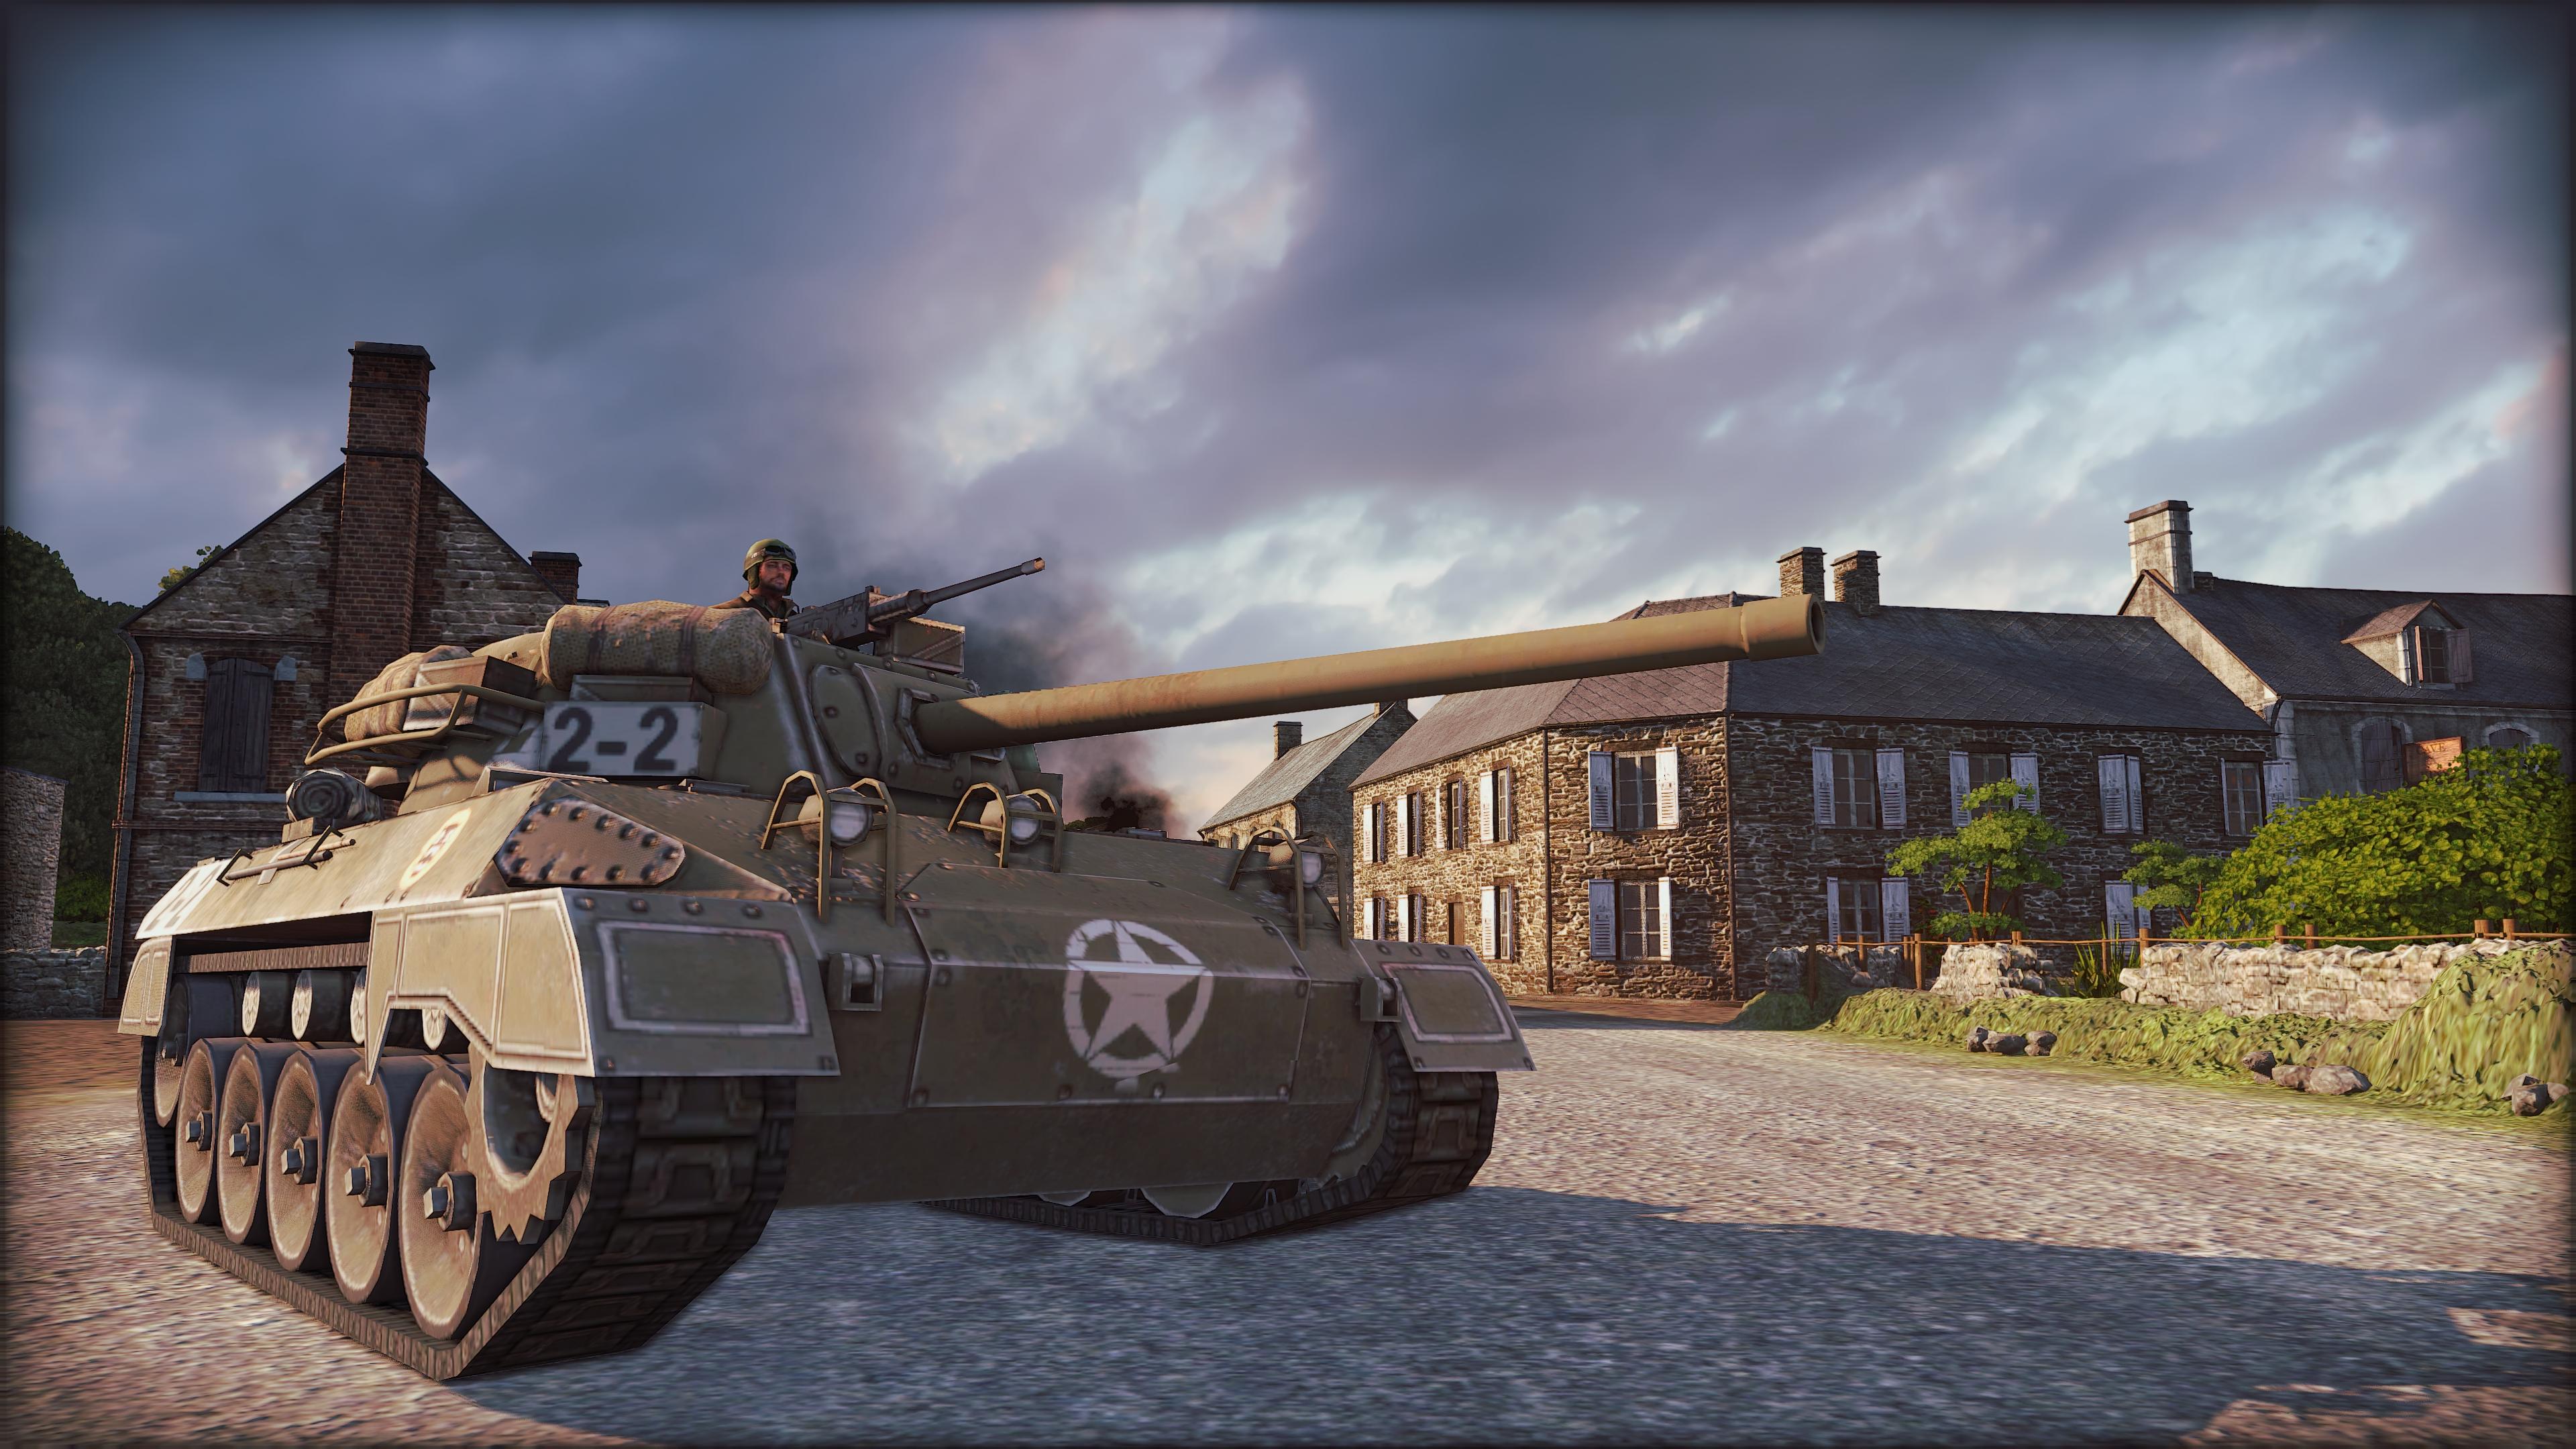 free download steel division normandy